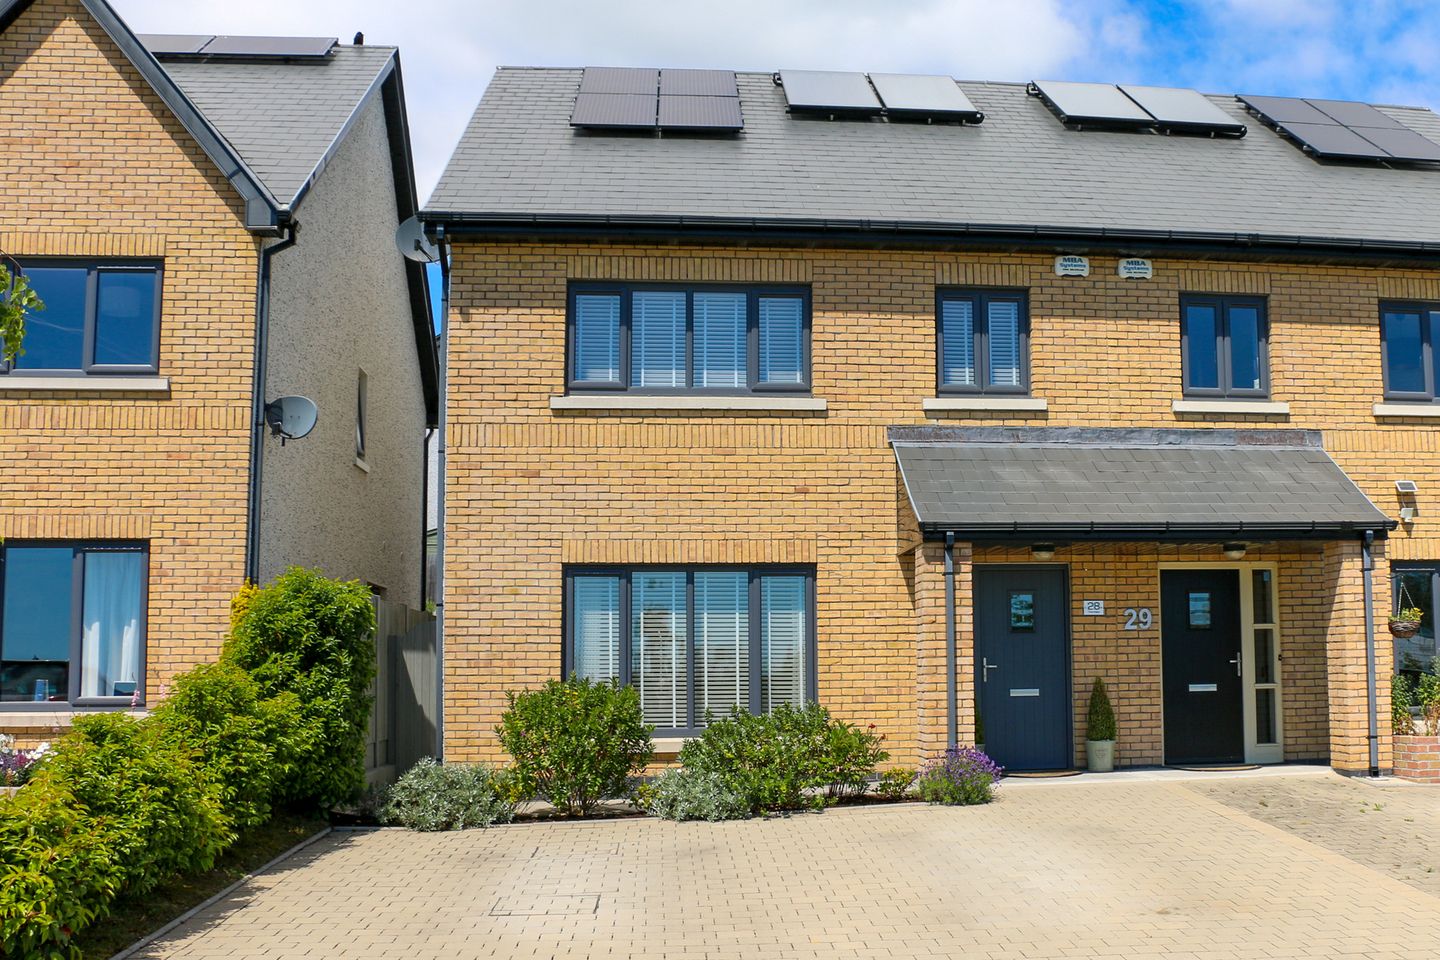 28 Thorndale, Delgany, Co. Wicklow